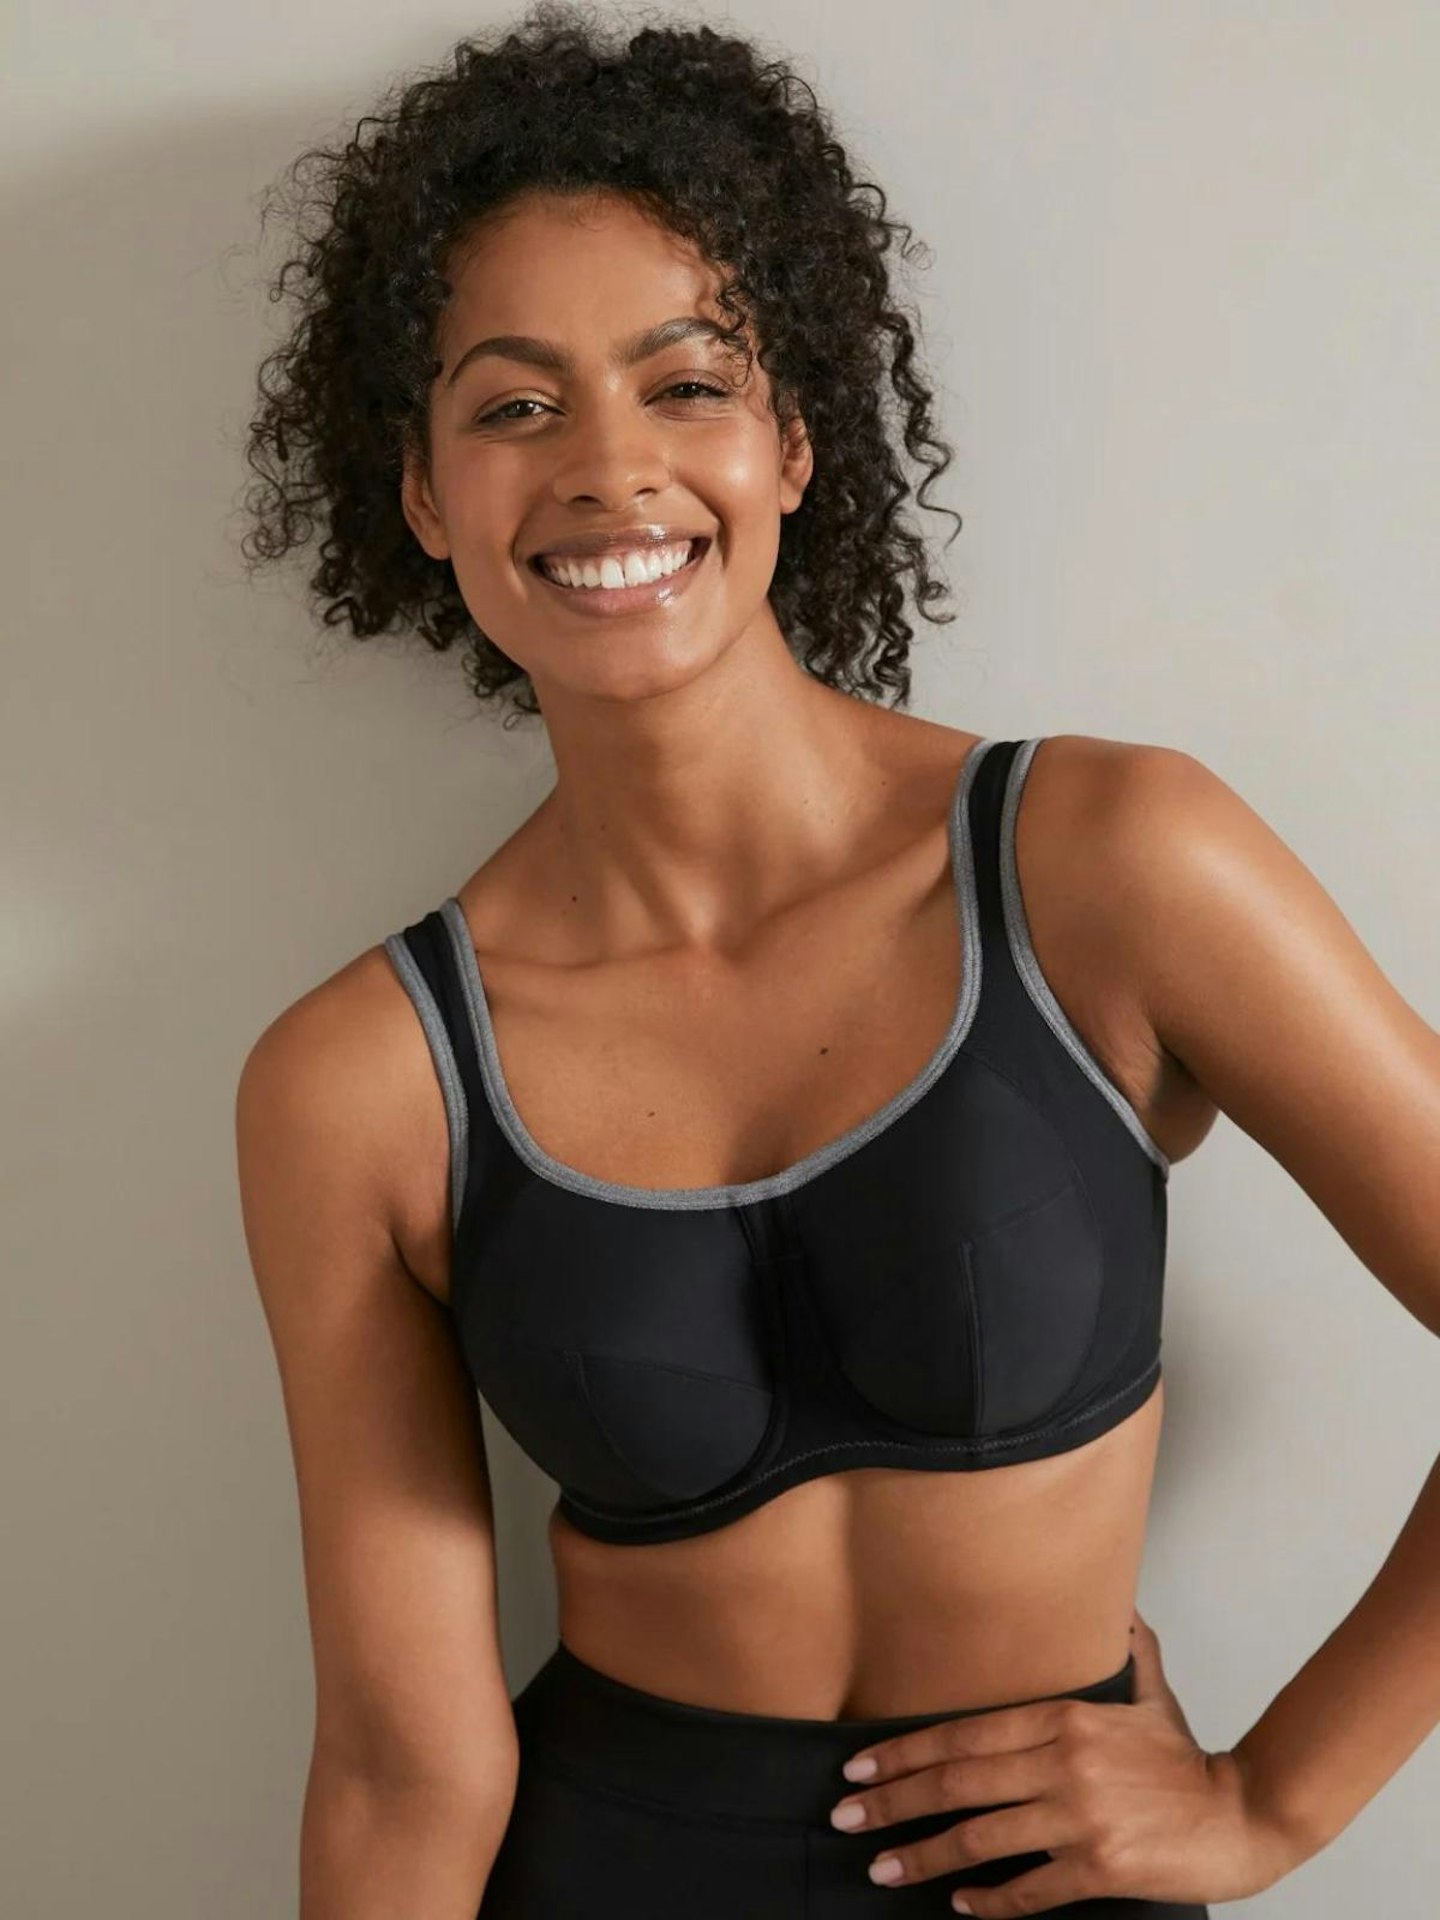 Support for every sport. New sports bras wear for all have arrived